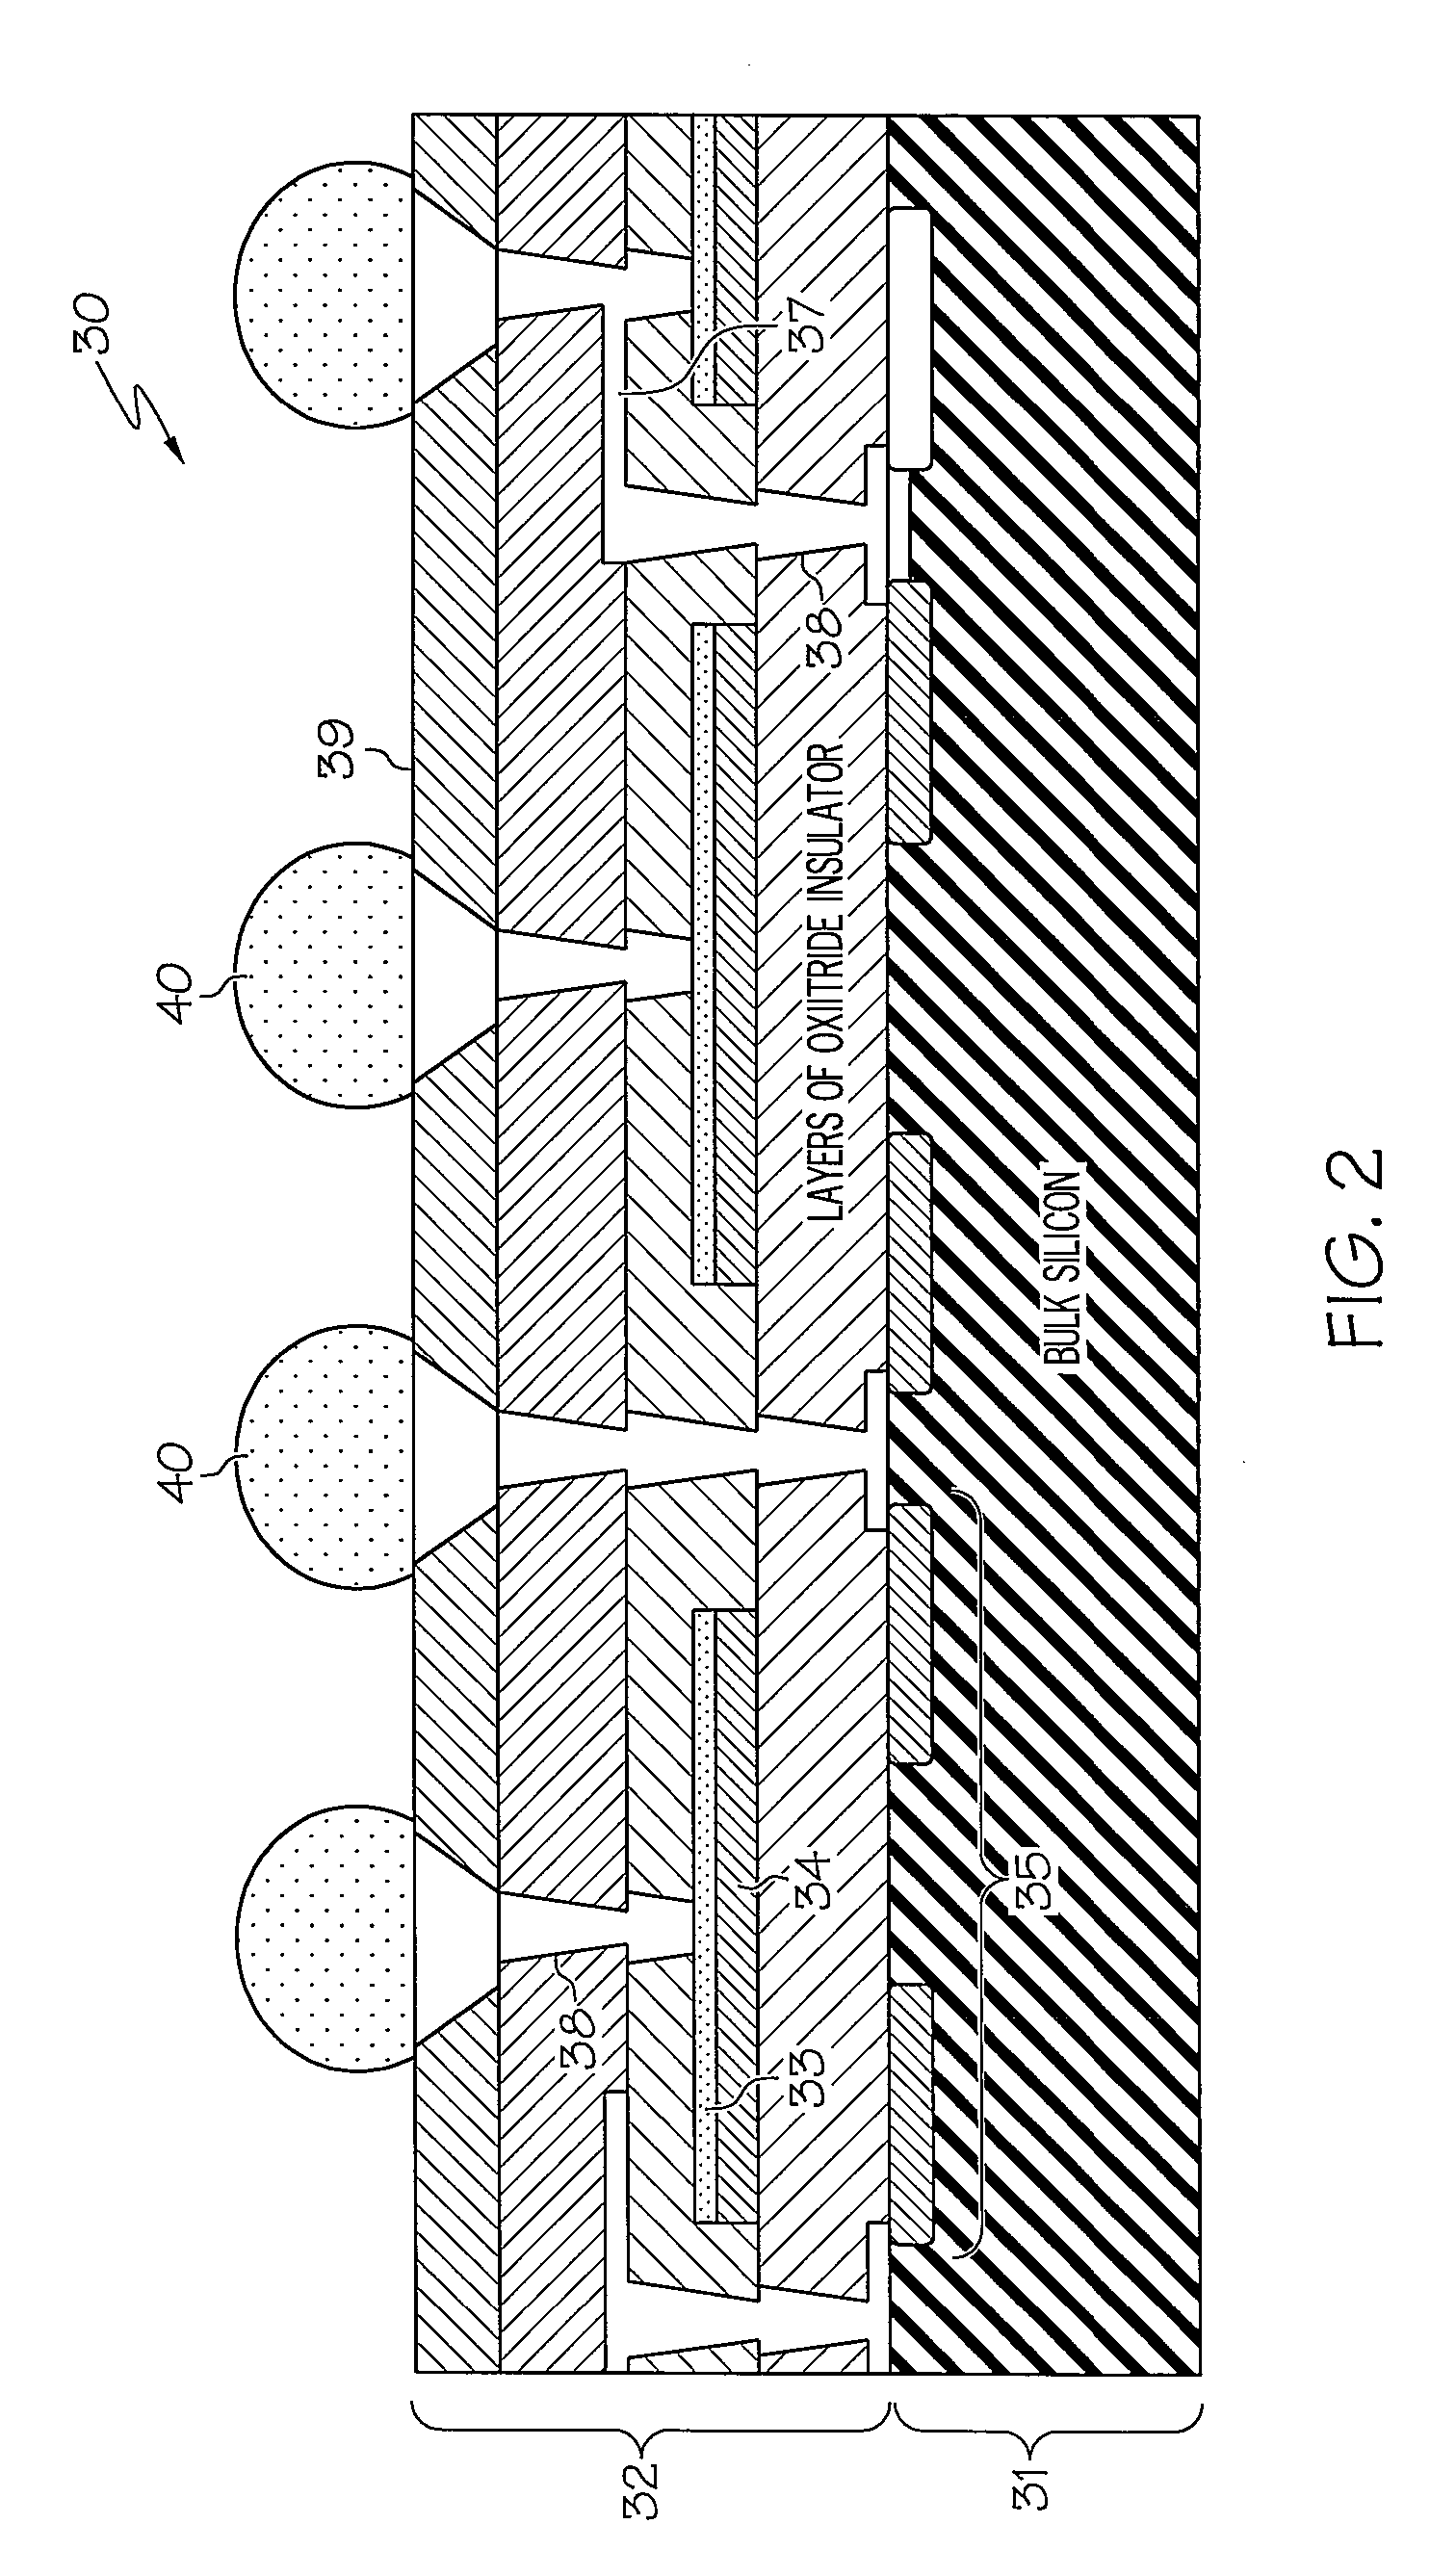 Method and Apparatus for Providing Thermal Management on High-Power Integrated Circuit Devices